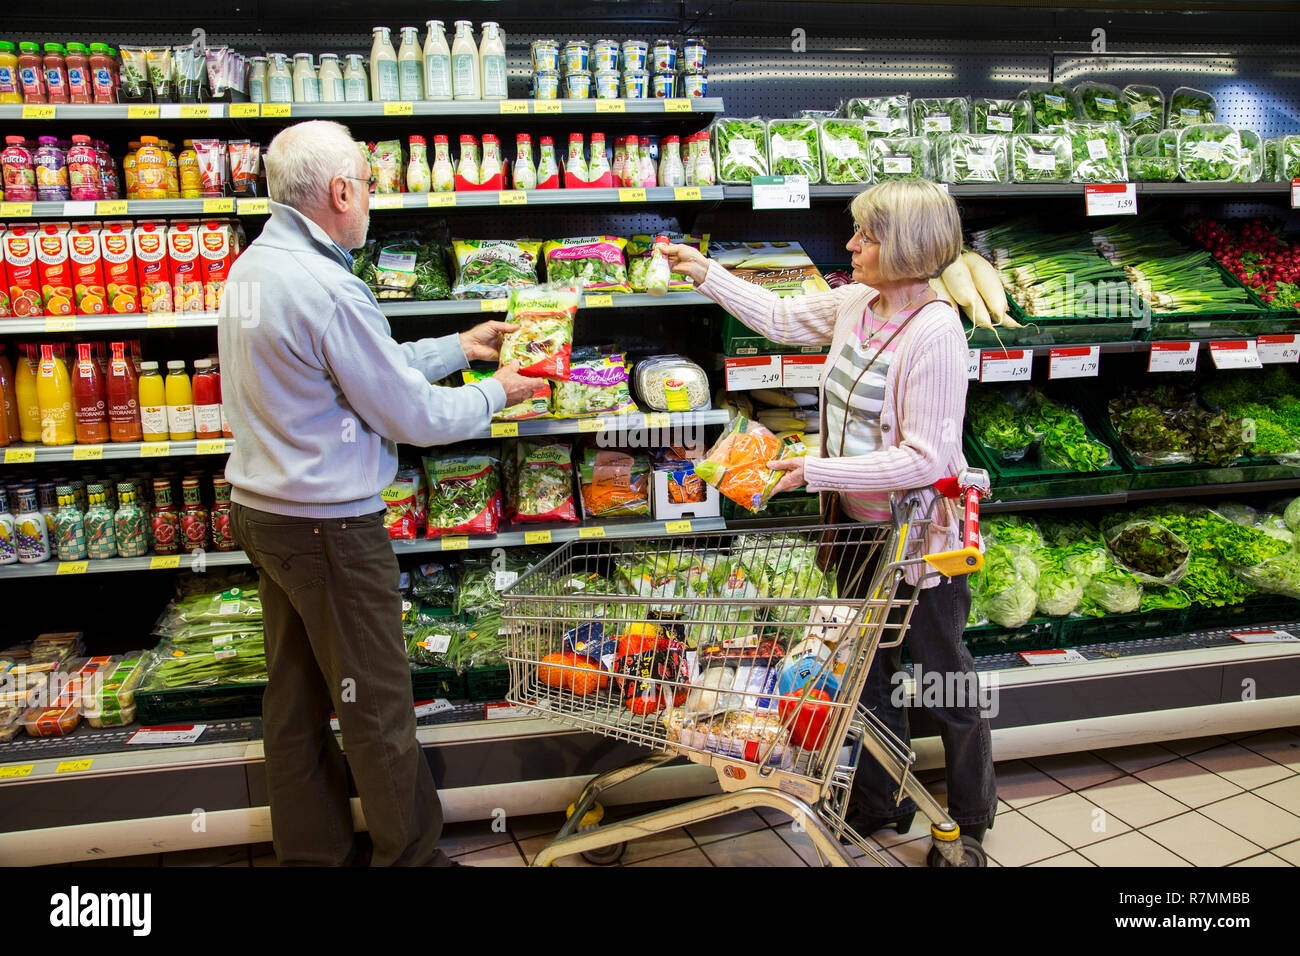 https://c8.alamy.com/comp/R7MMBB/senior-couple-shopping-with-a-shopping-trolley-in-front-of-a-shelf-with-refrigerated-vegetables-in-a-supermarket-germany-R7MMBB.jpg